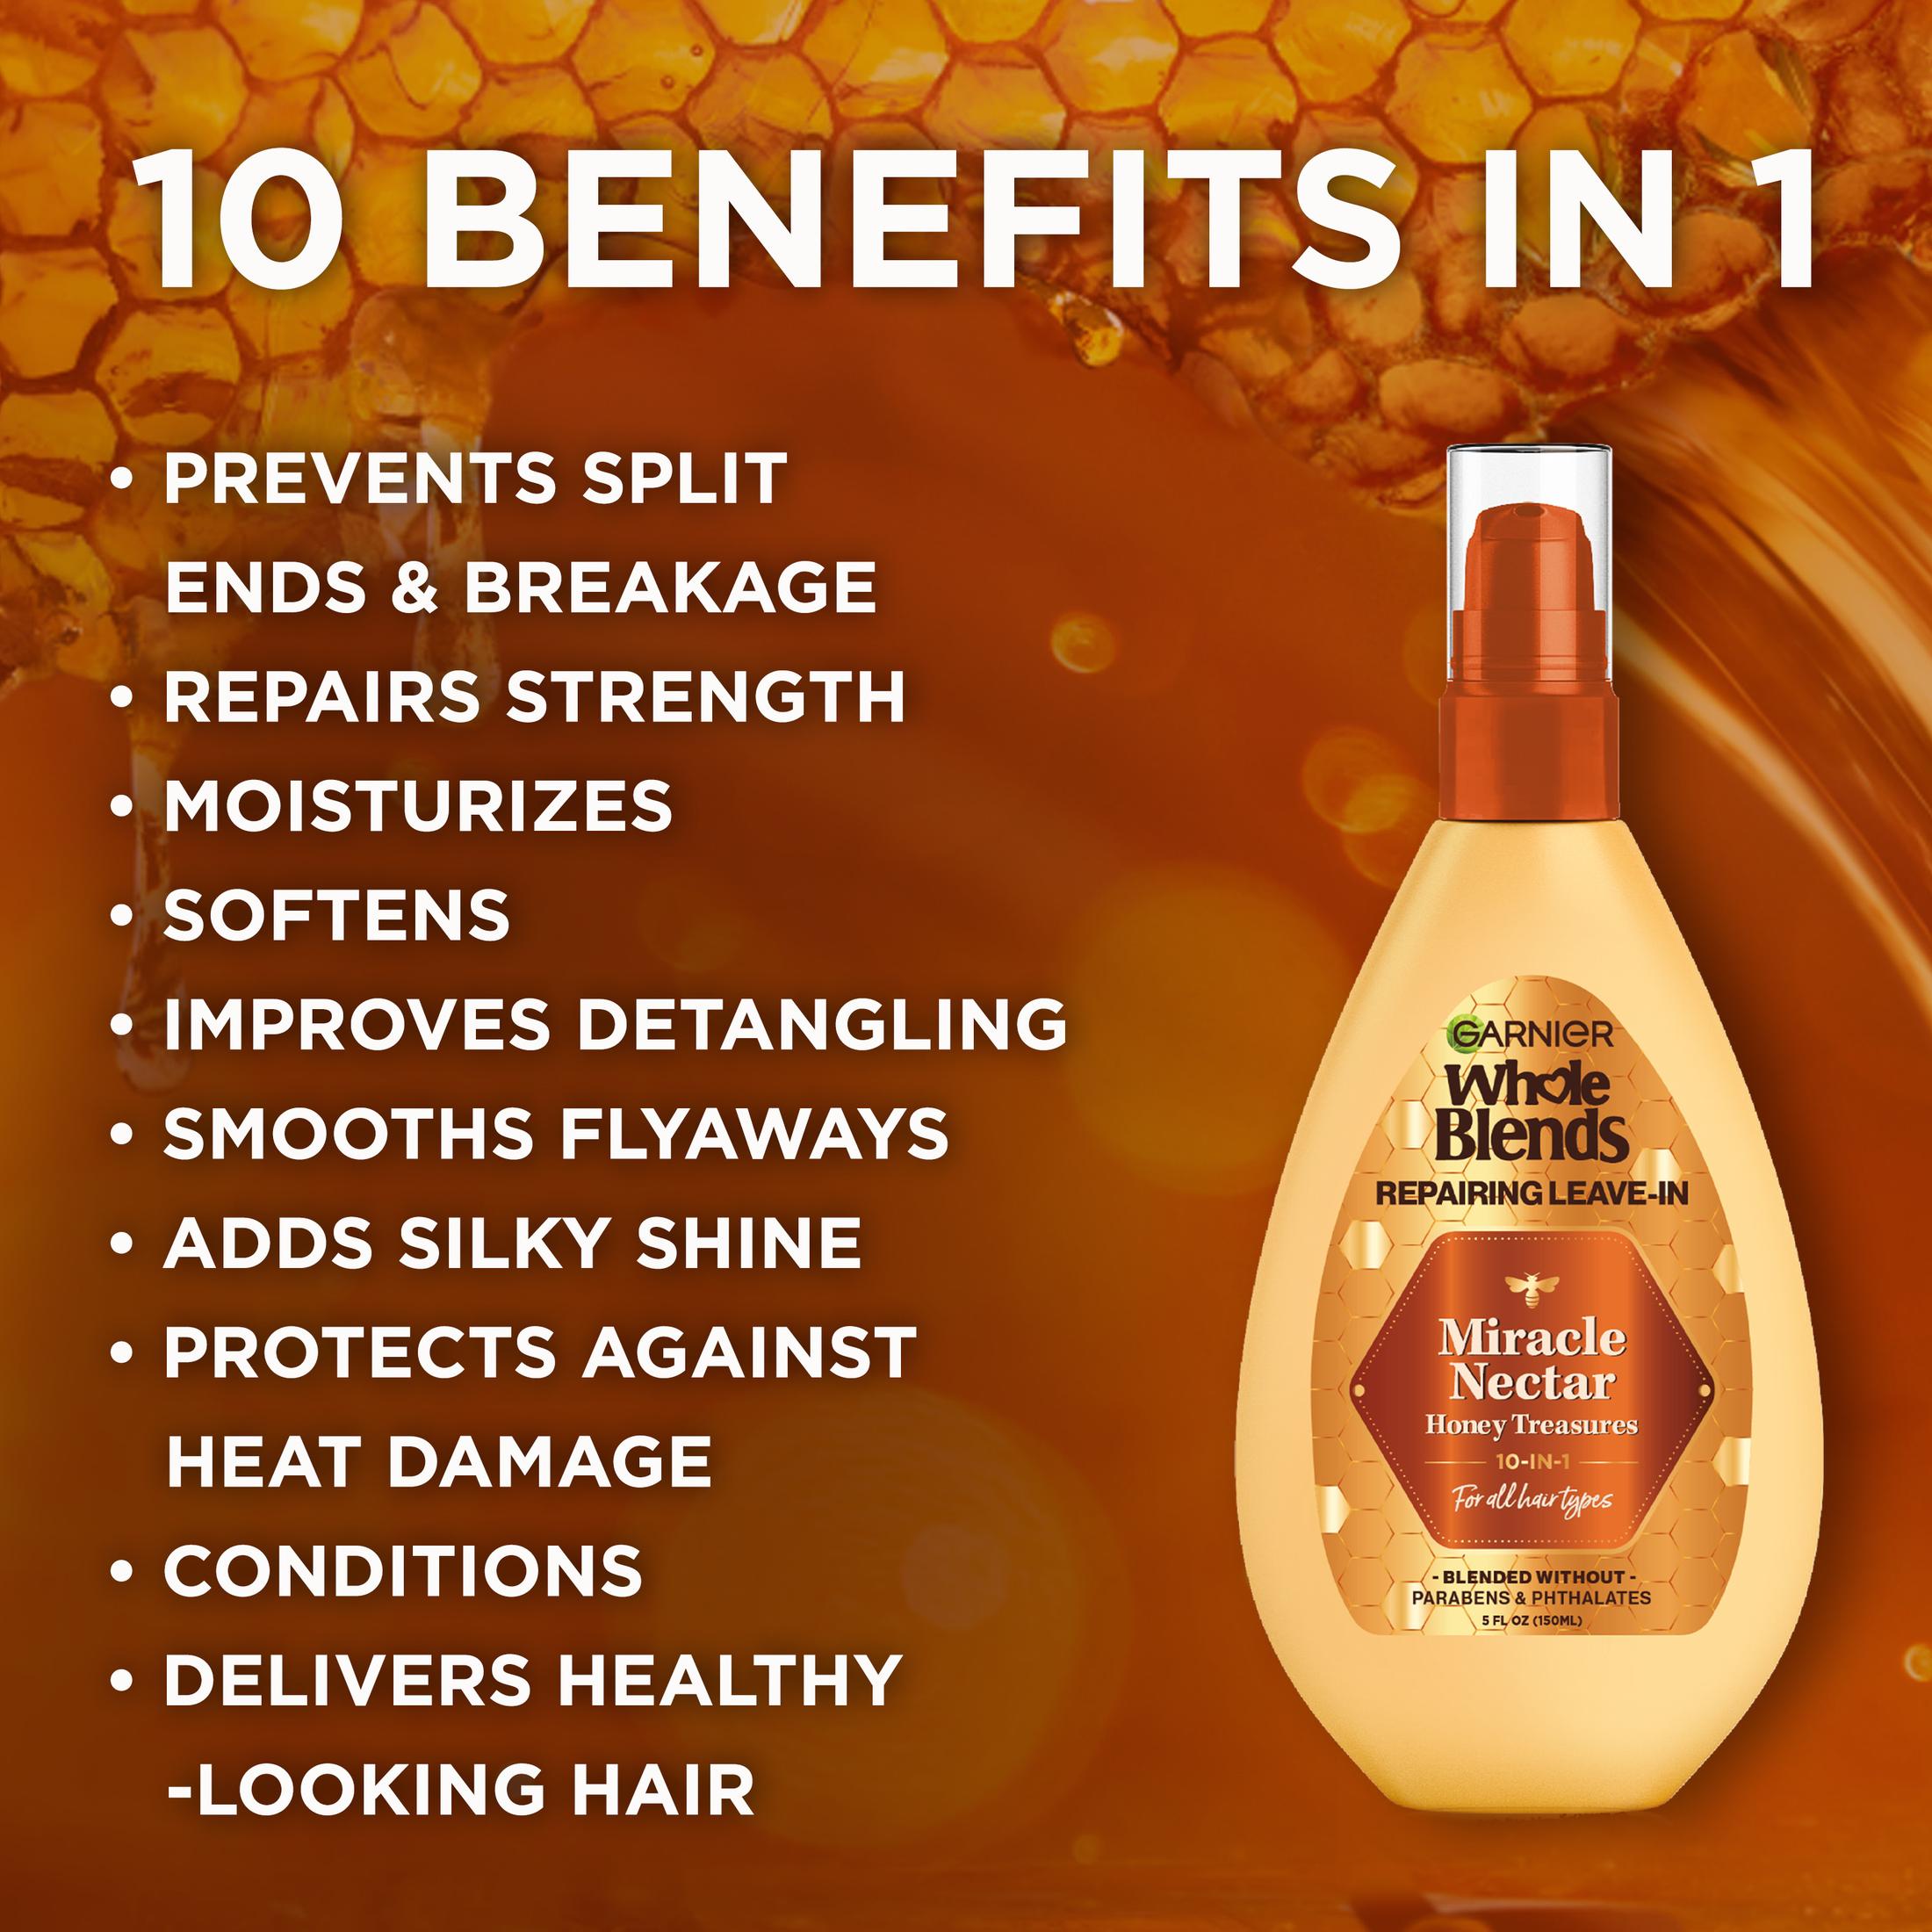 Garnier Whole Blends Honey Treasures Repairing Leave In Conditioner with Honey, 5 fl oz - image 3 of 10